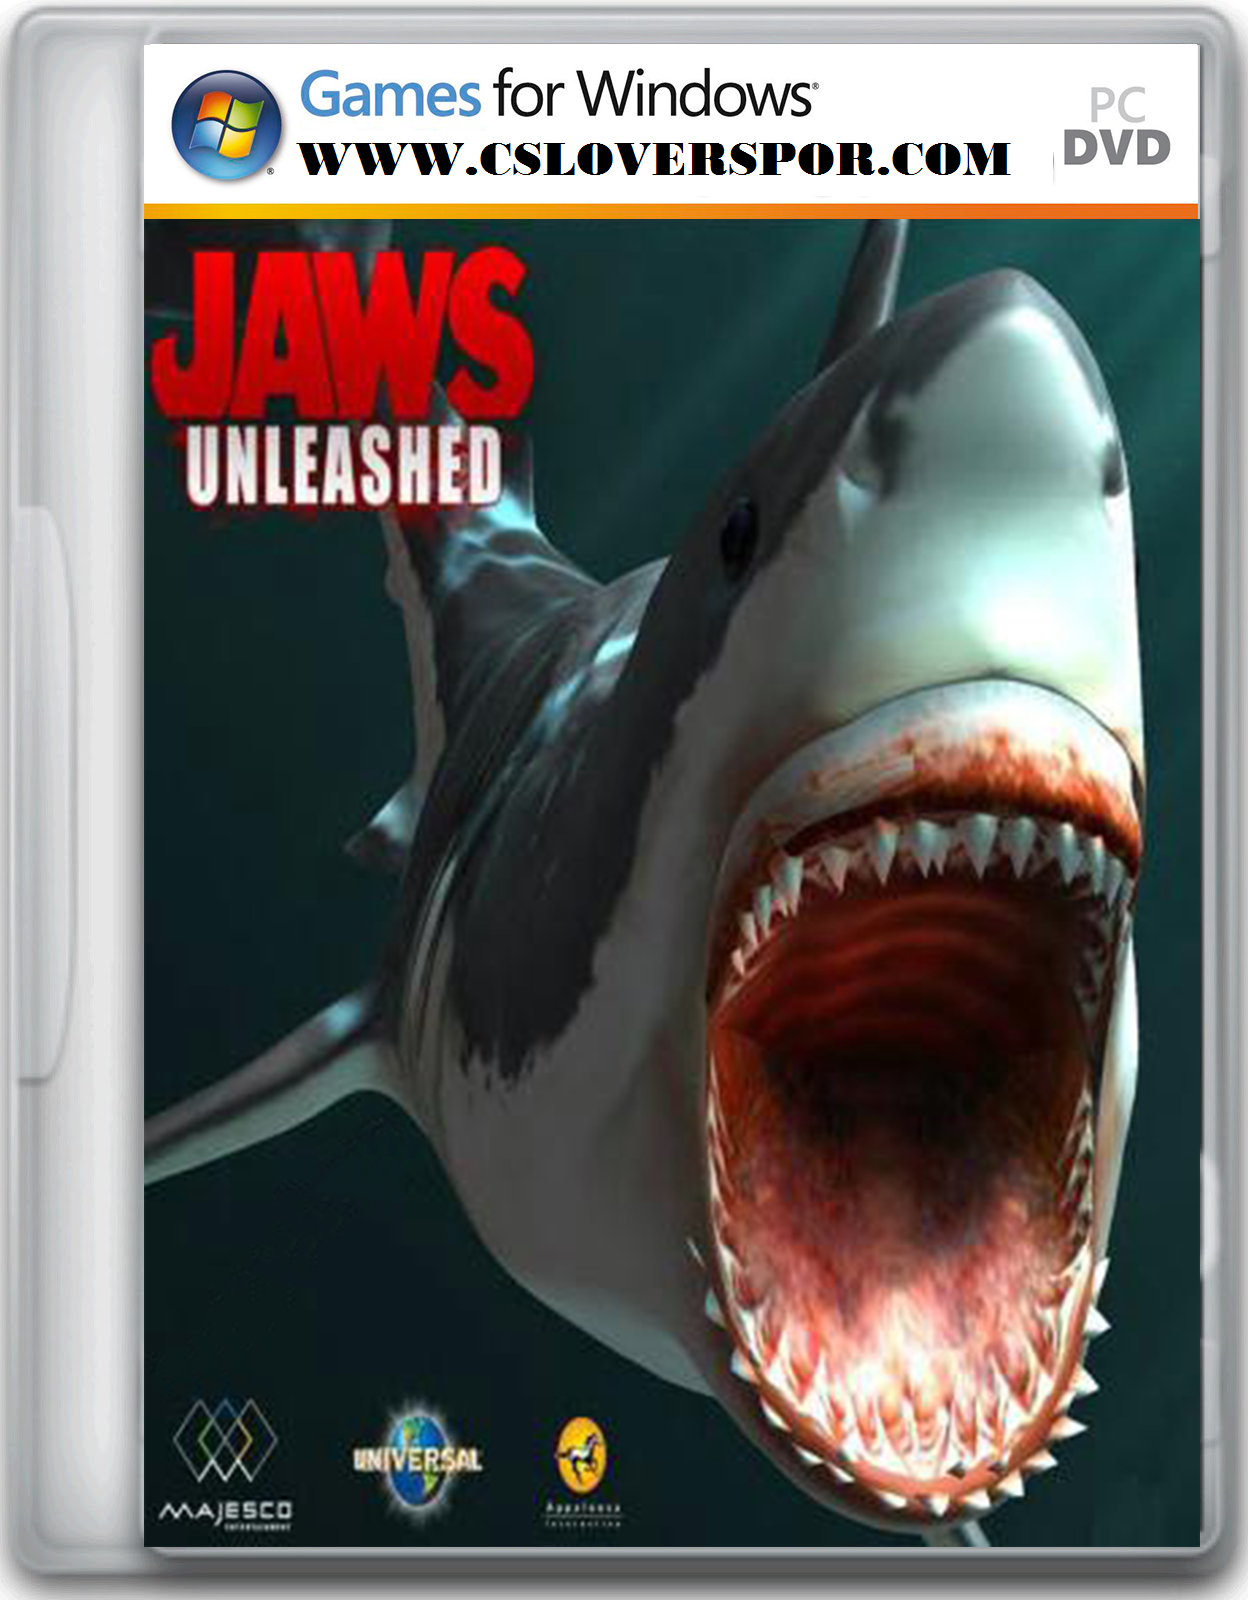 Jaws unleashed play on computer